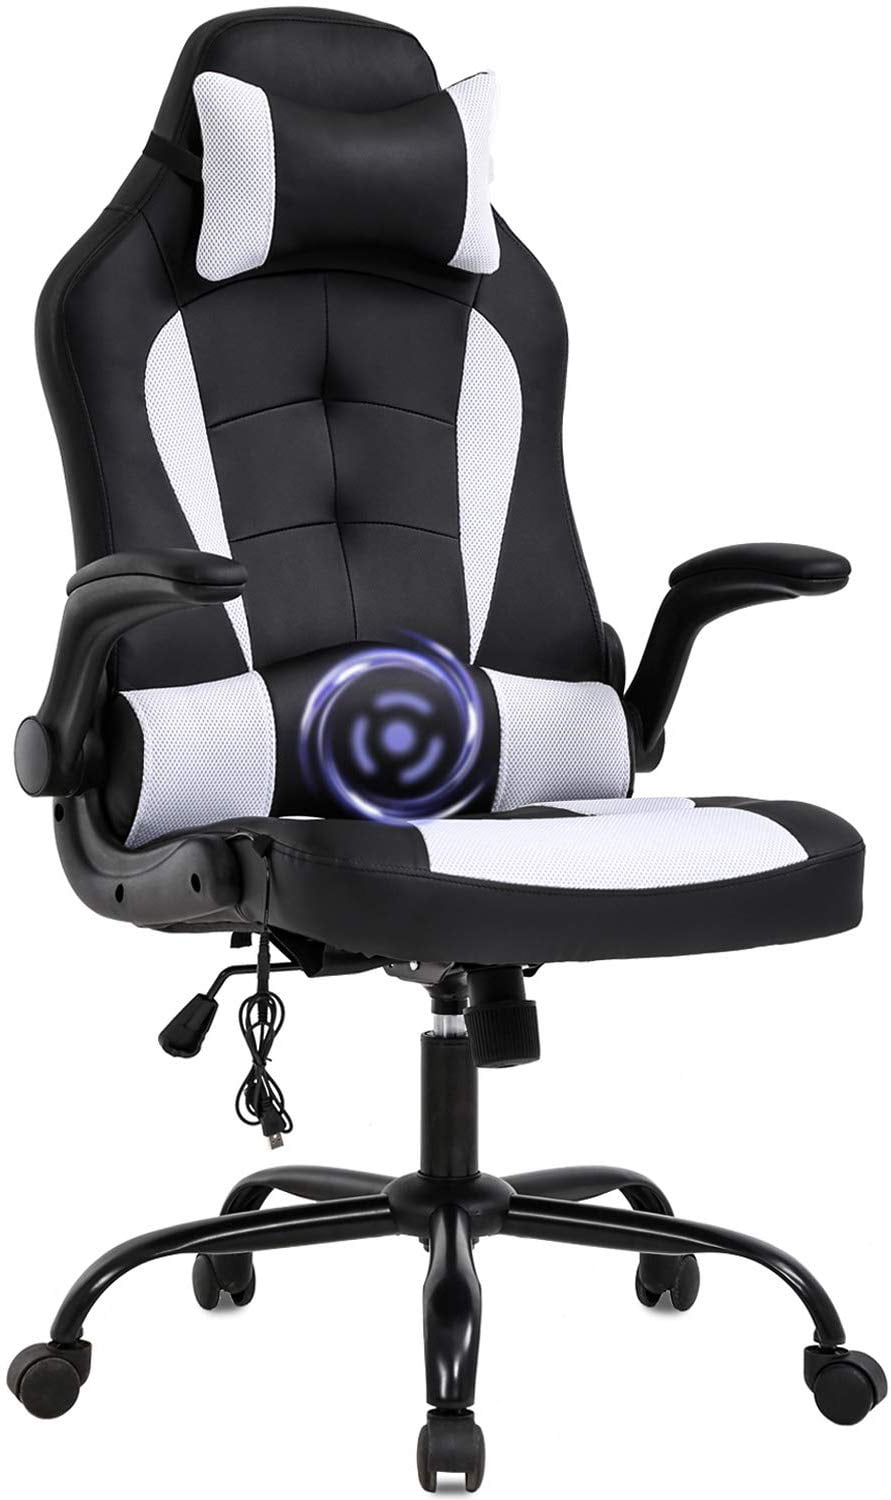 Blue Gaming Chair Massaging Office Chair Racing Computer Chair with Lumbar Support Footrest Armrest Headrest Ergonomic Desk Chair Task High Back PU Executive Rolling Swivel Chair for Adults Women